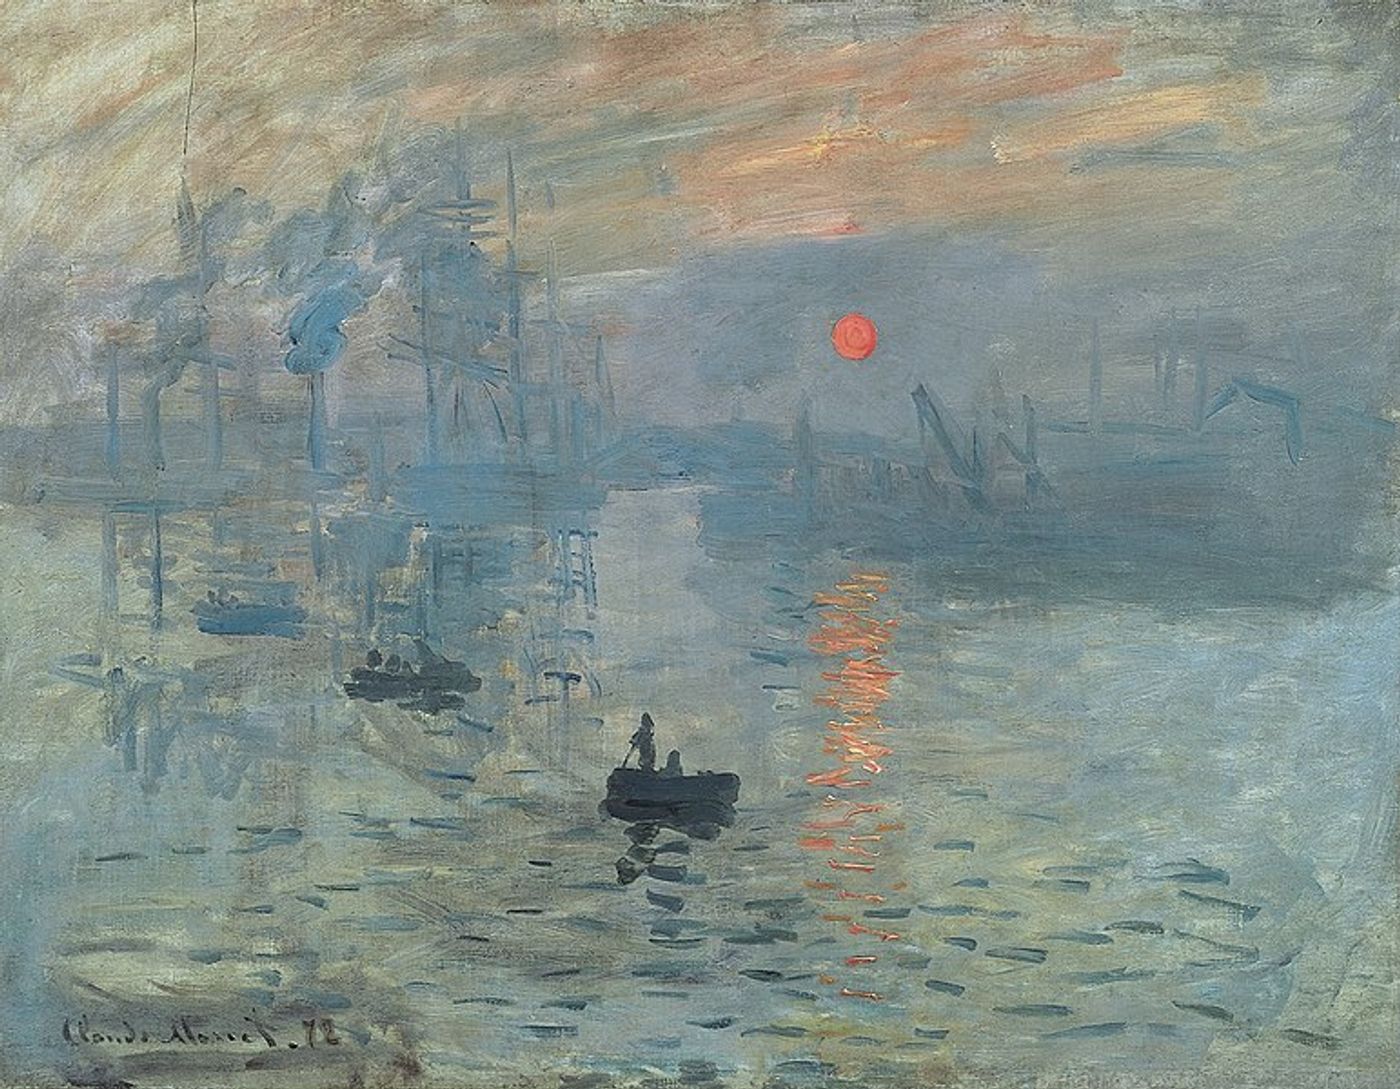 Monet's Impressionist, Sunrise (1872). (This work is in the US Public Domain in accordance with US copyright laws)